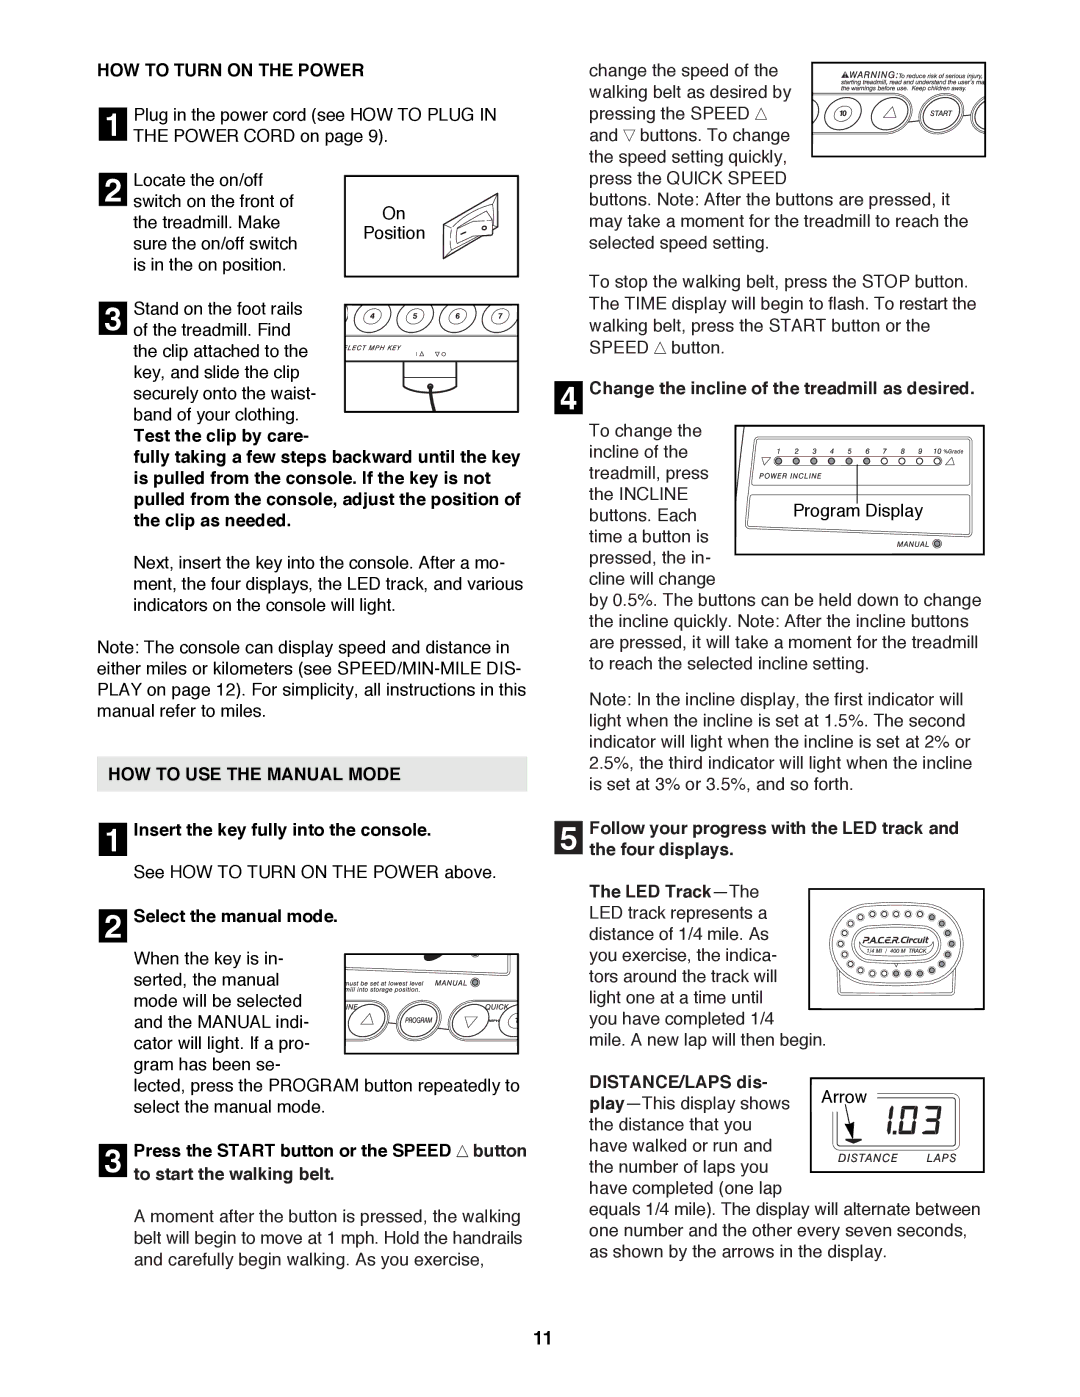 ProForm 831.299463 user manual HOW to Turn on the Power, HOW to USE the Manual Mode 